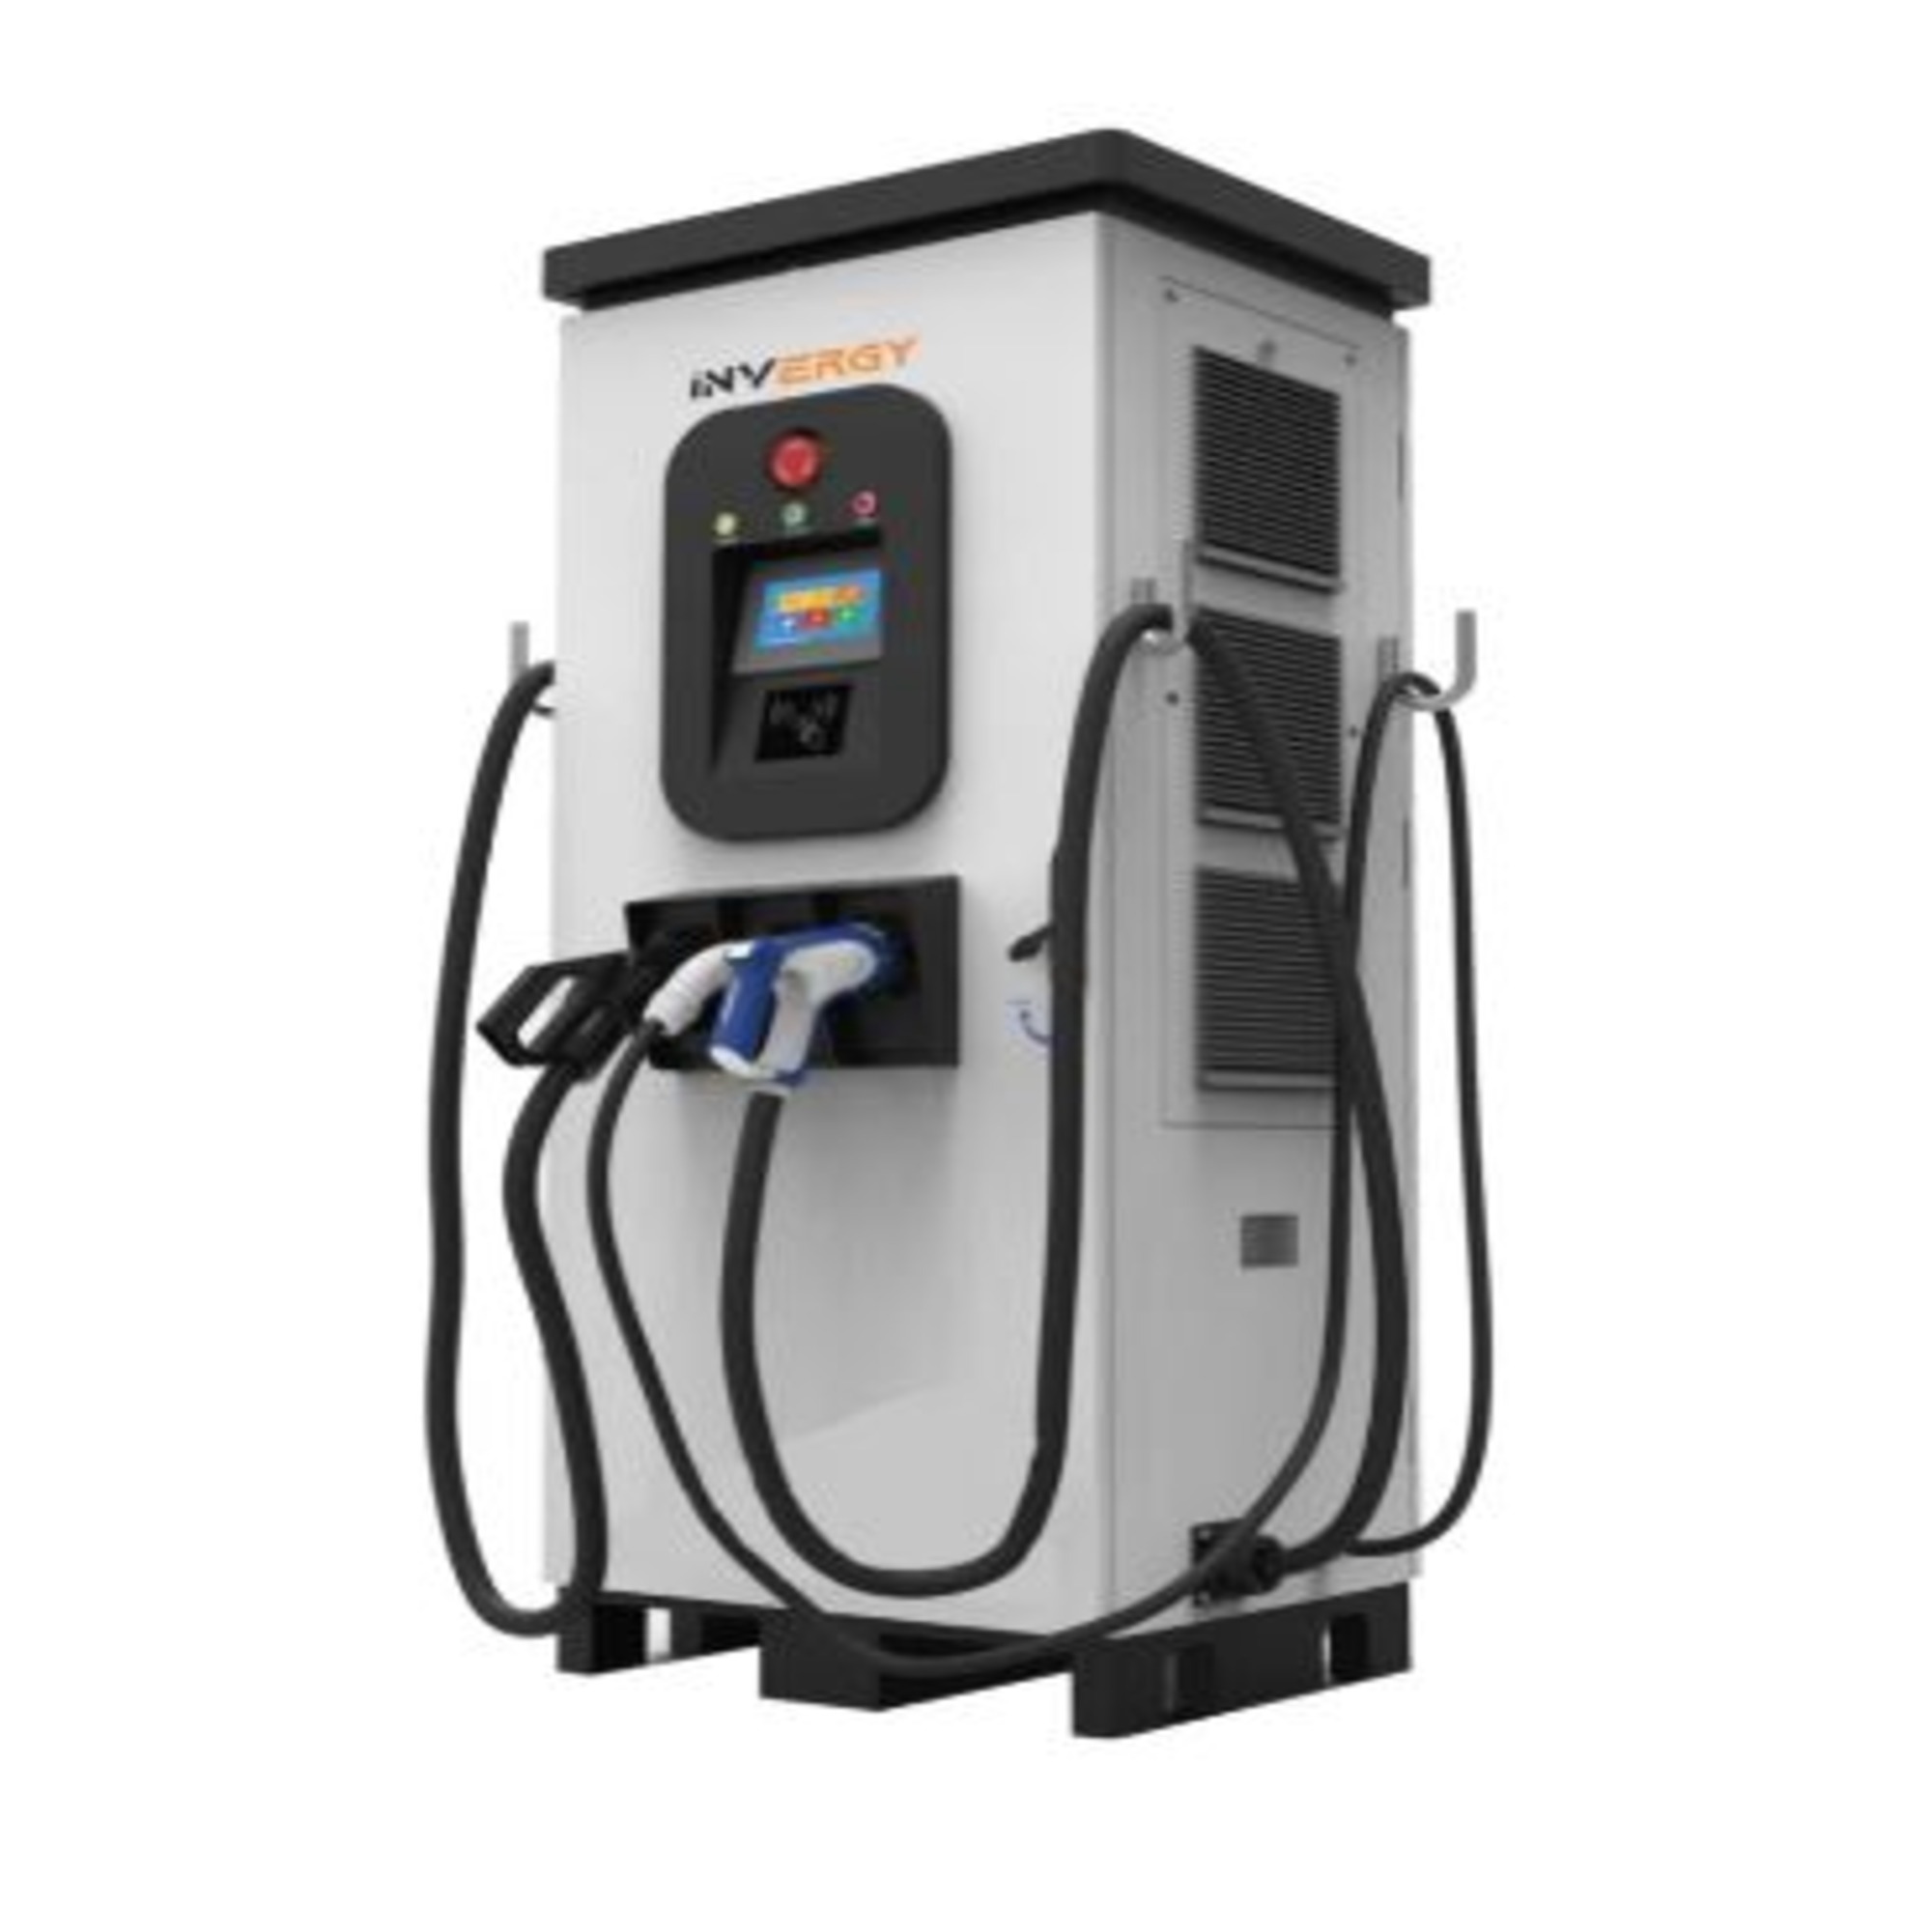 INVERGY 142 KW DC Fast Charger